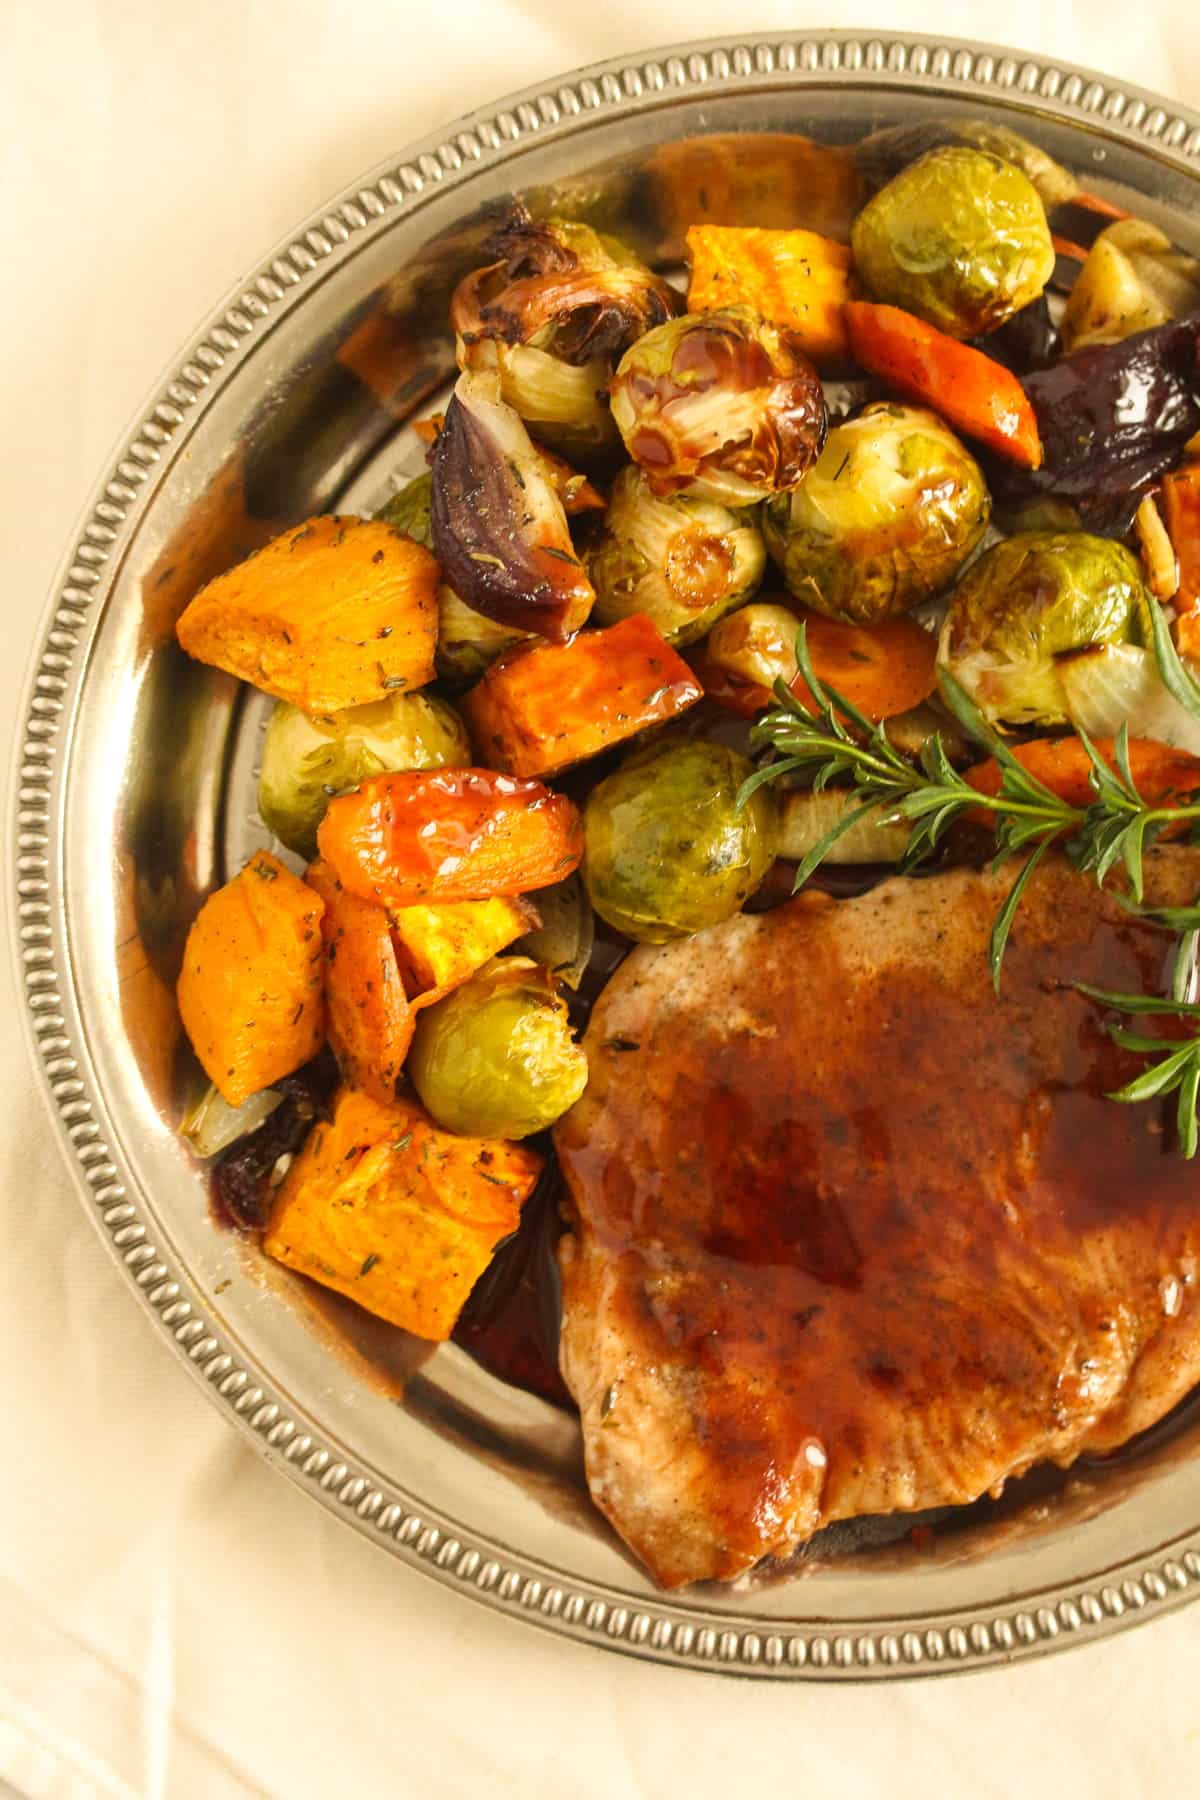 roasted veggies on a plate with turkey cutlet and sauce.